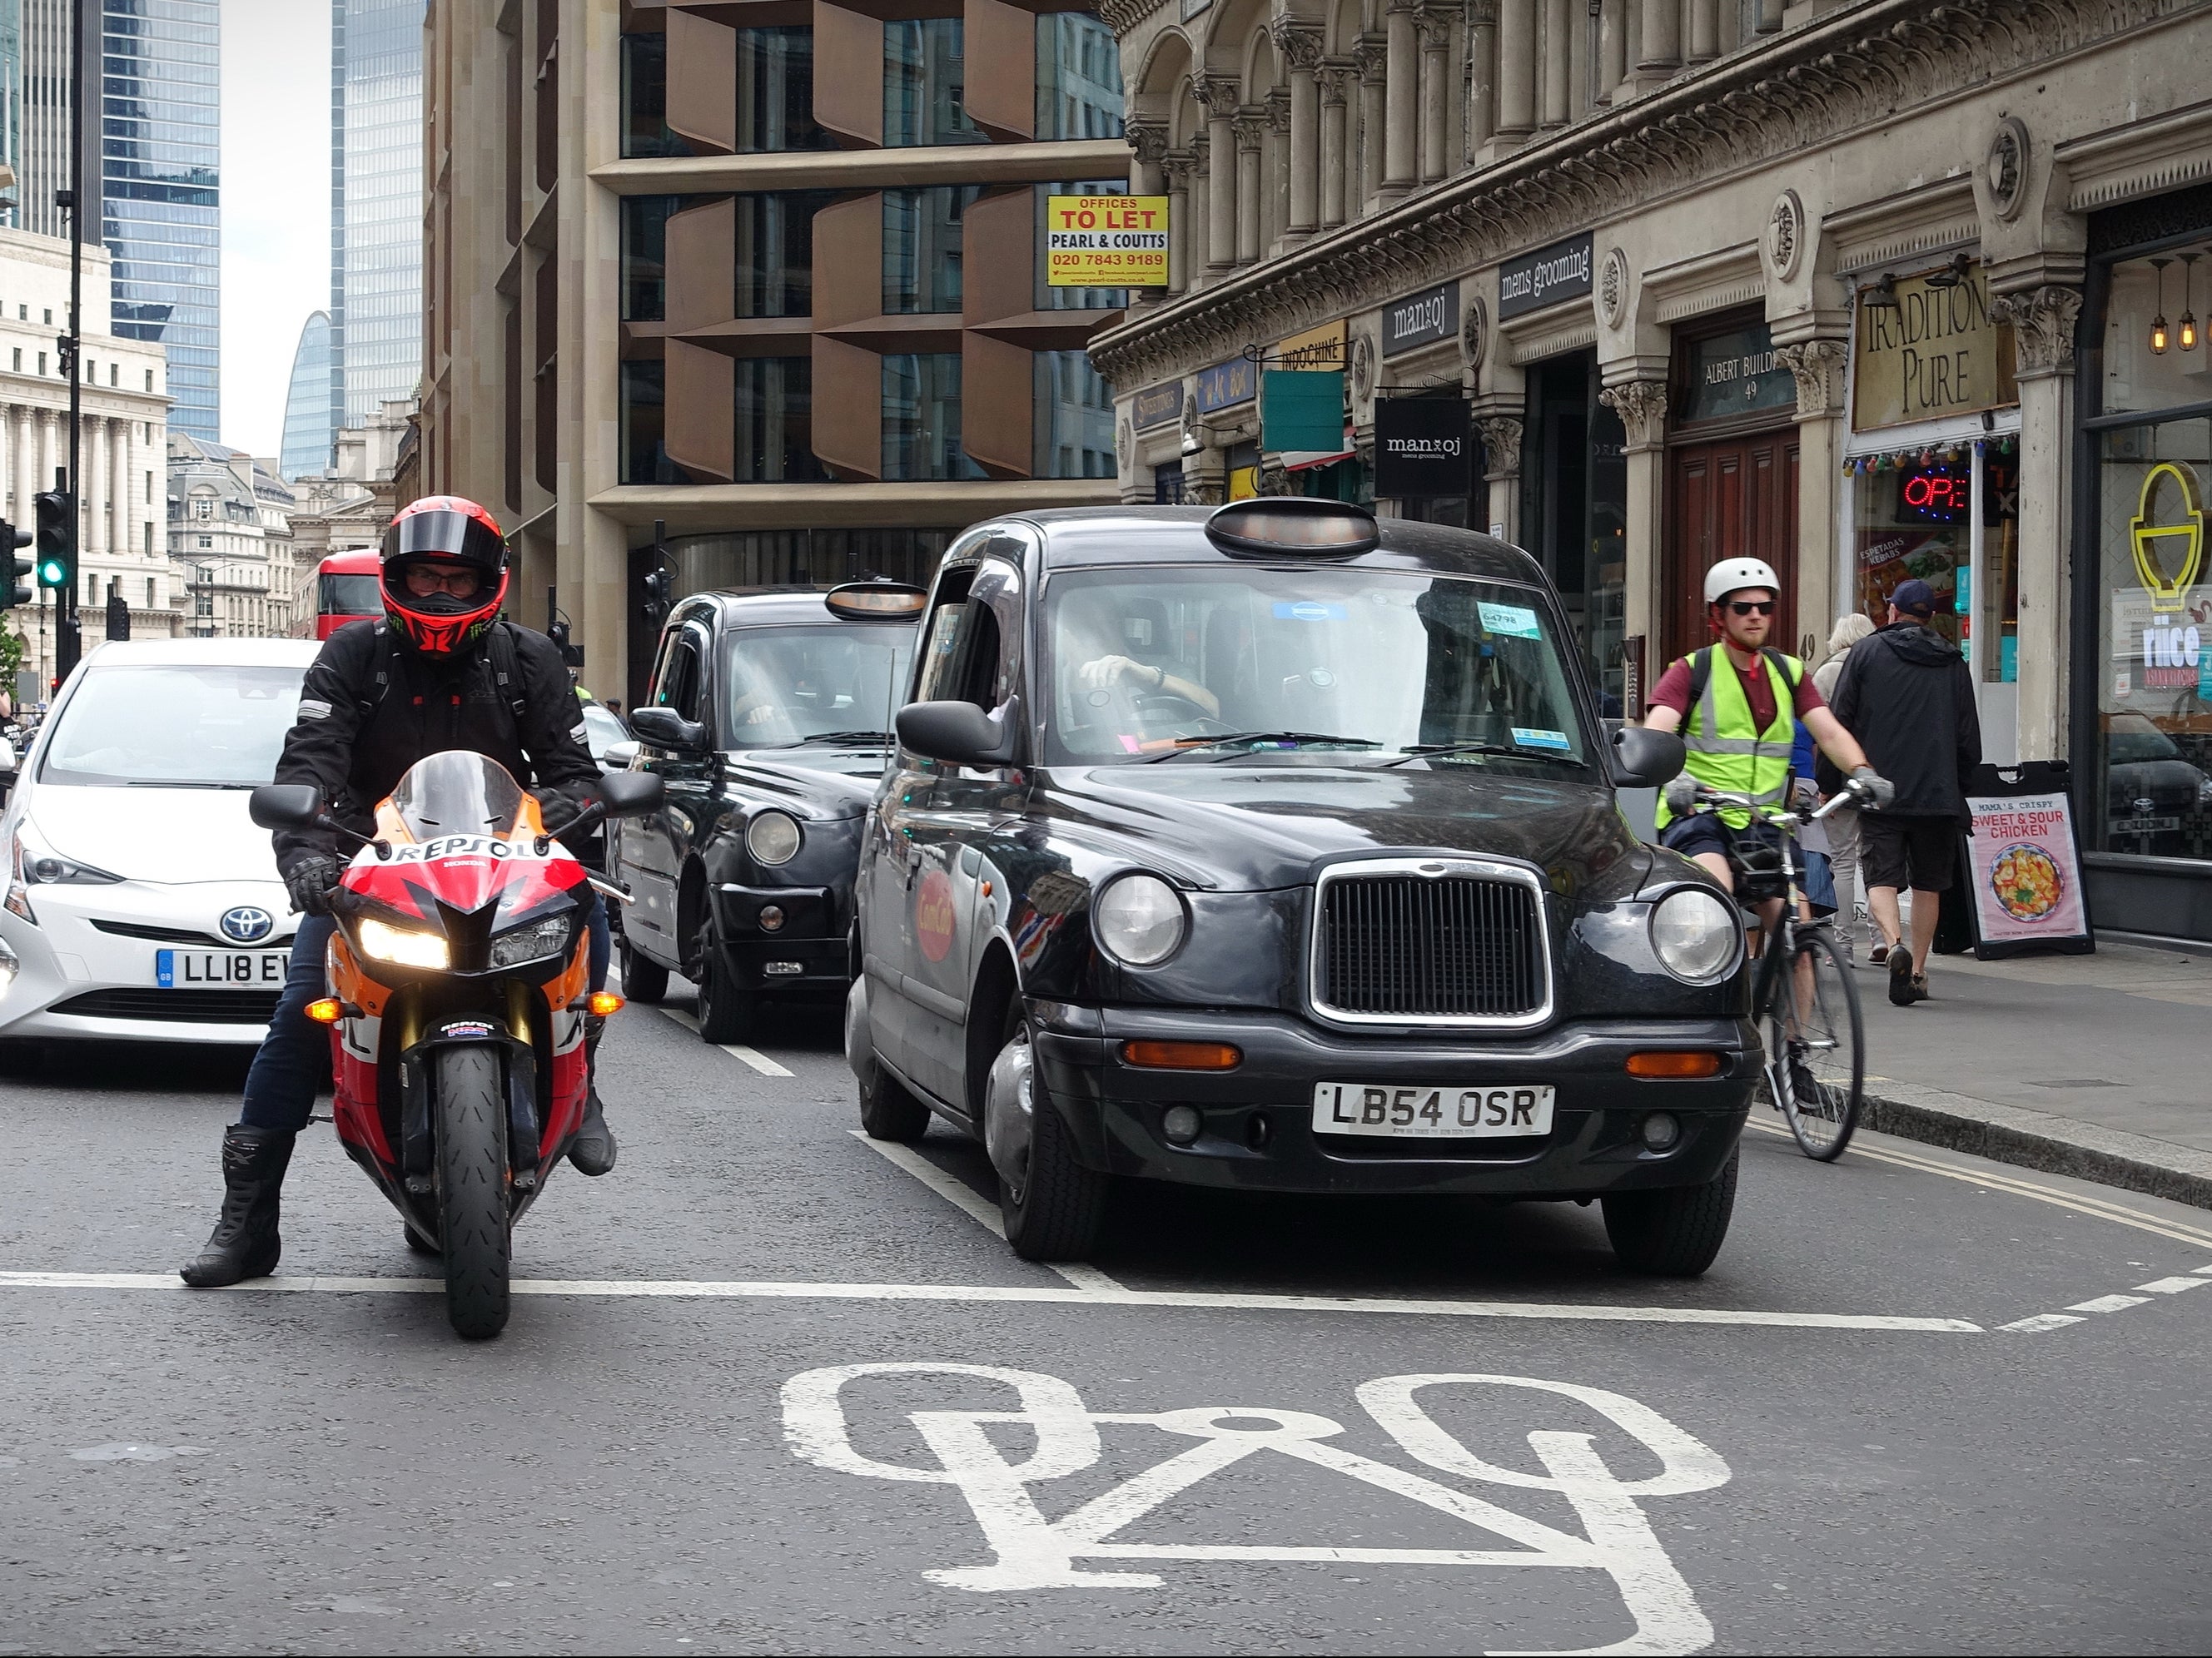 Traffic passes along a busy road in the City of London